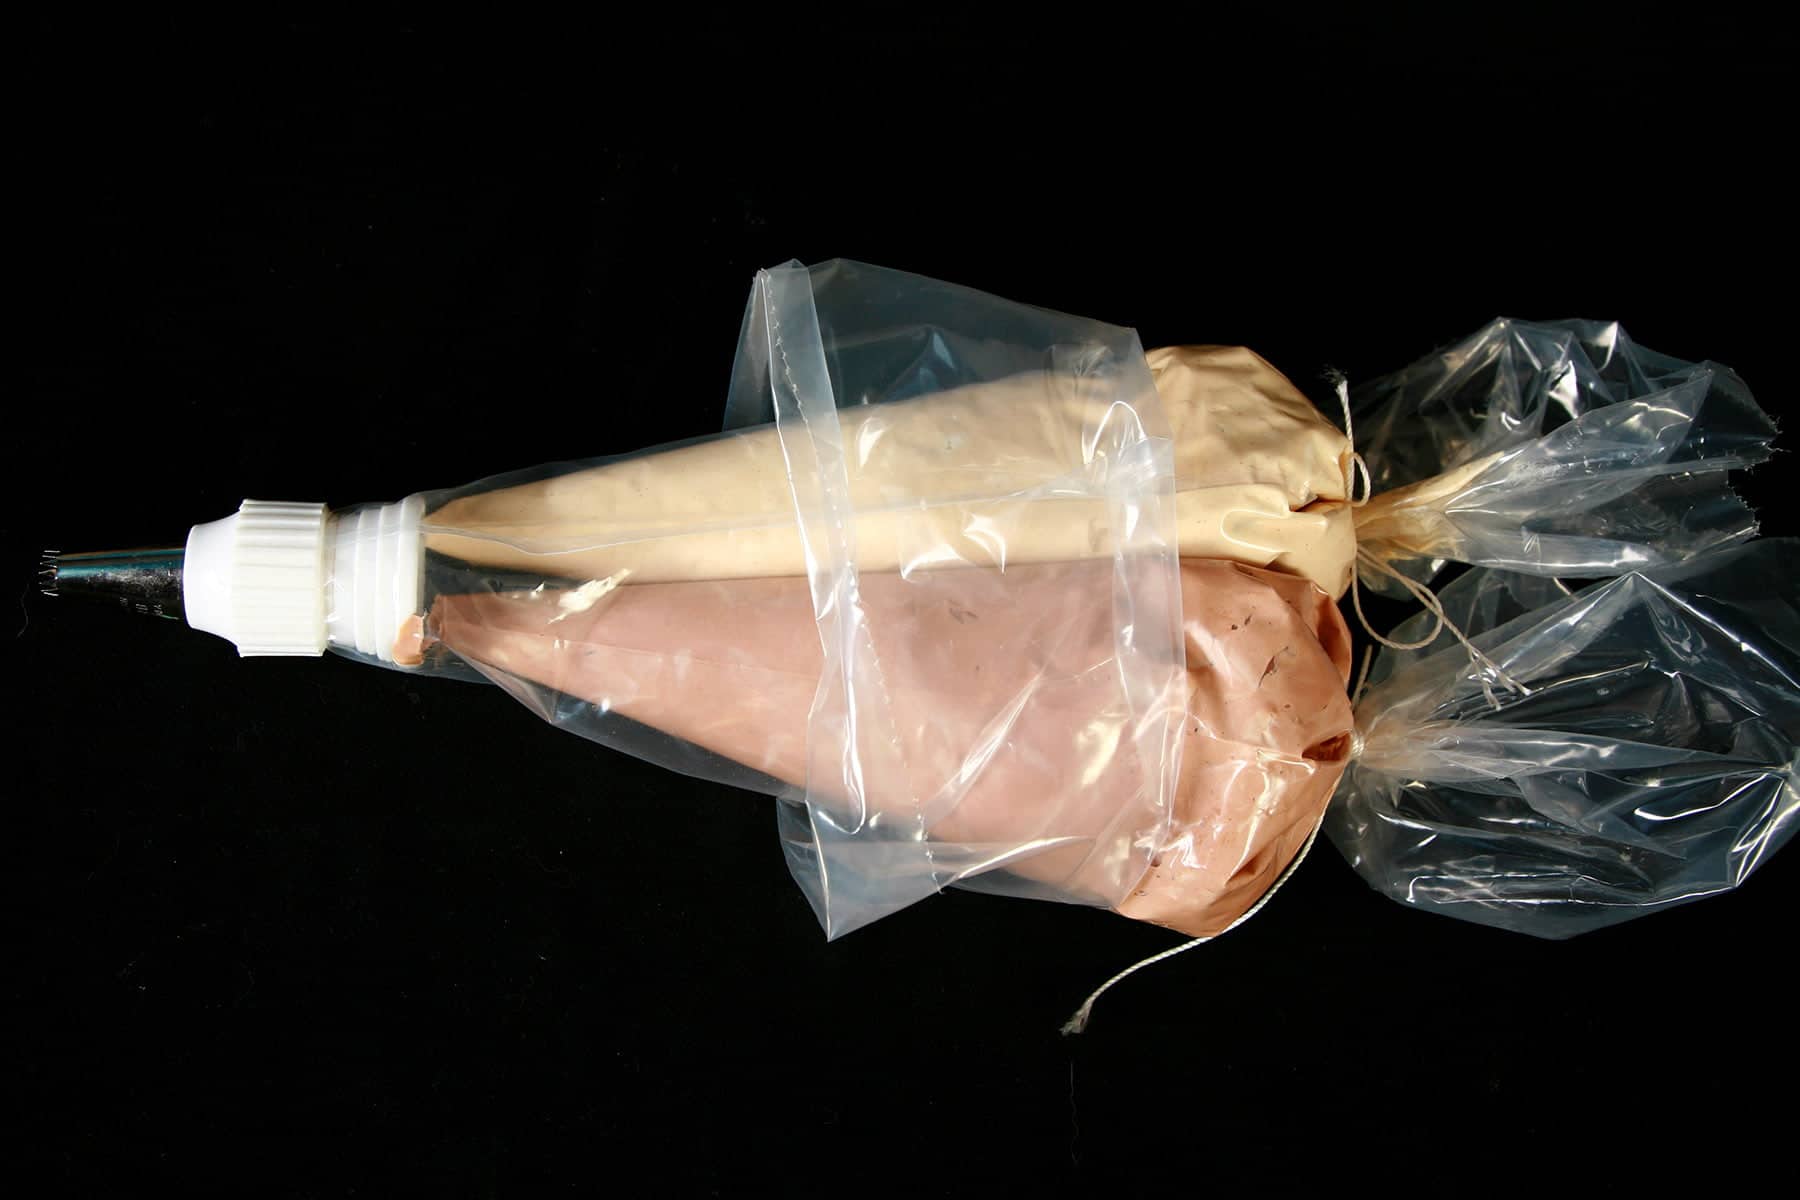 Two pastry bags filled with frosting - one tan, one brown - are shown inserted into a larger pastry bag that has been set up with a coupler and star tip.